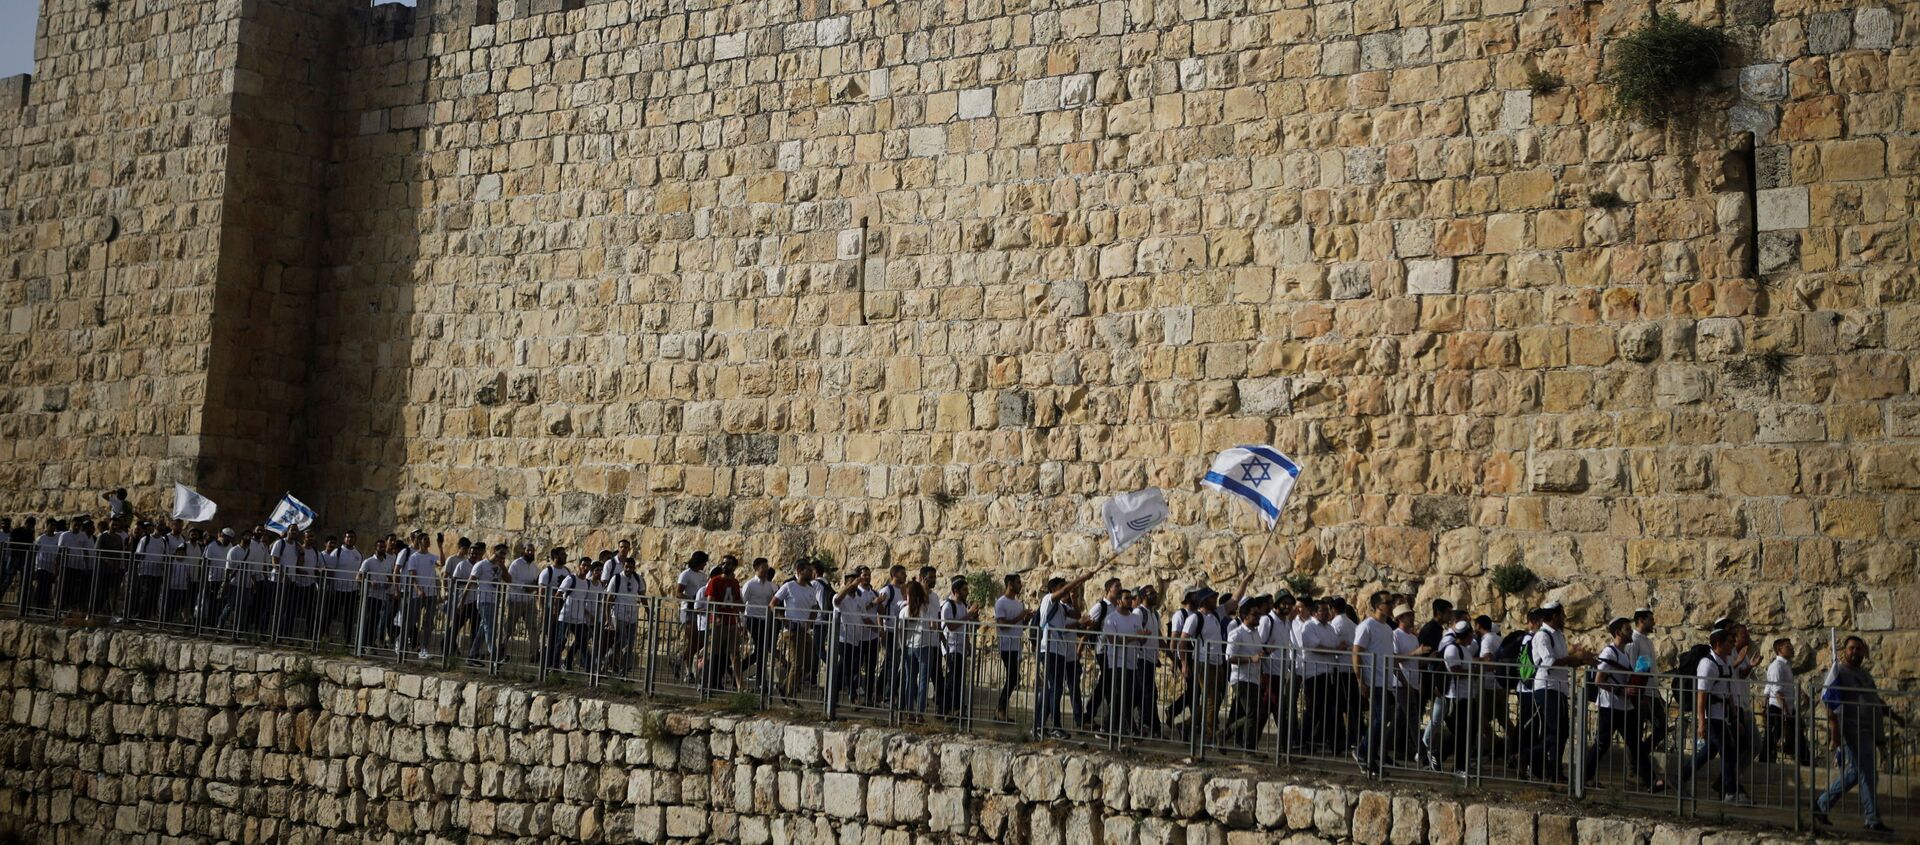 Youths wave Israeli flags during a parade marking Jerusalem Day amid Israeli-Palestinian tension as they march along the walls surrounding Jerusalem's Old City, May 10, 2021. REUTERS/Nir Elias/File Photo - Sputnik International, 1920, 16.08.2021